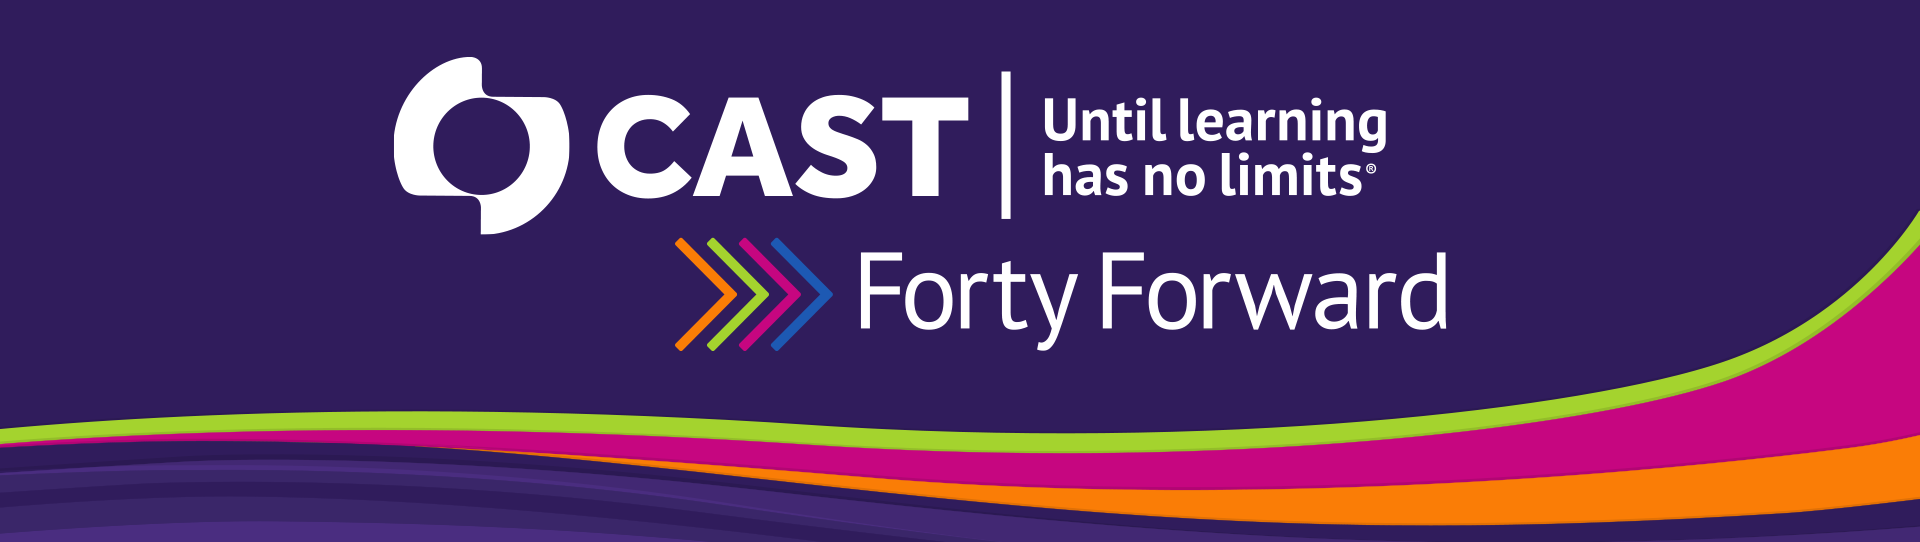 CAST, until learning has no limits. Forty forward.